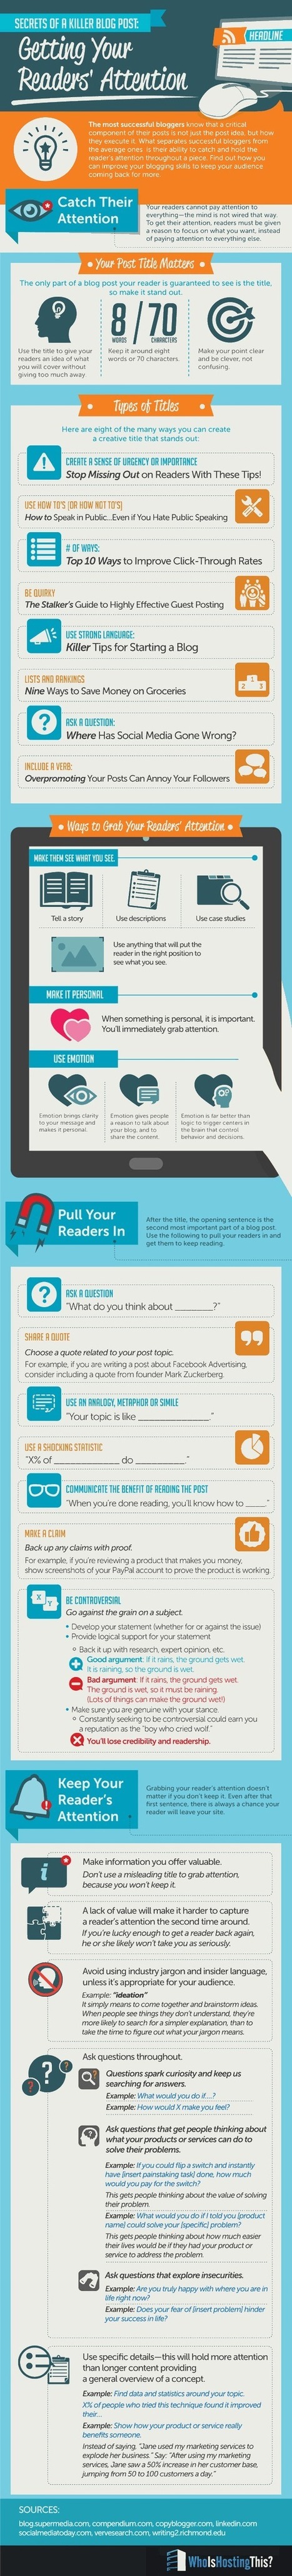 The Secrets to Writing an Attention-Grabbing Blog Post [Infographic] | Marketing Tips | Scoop.it